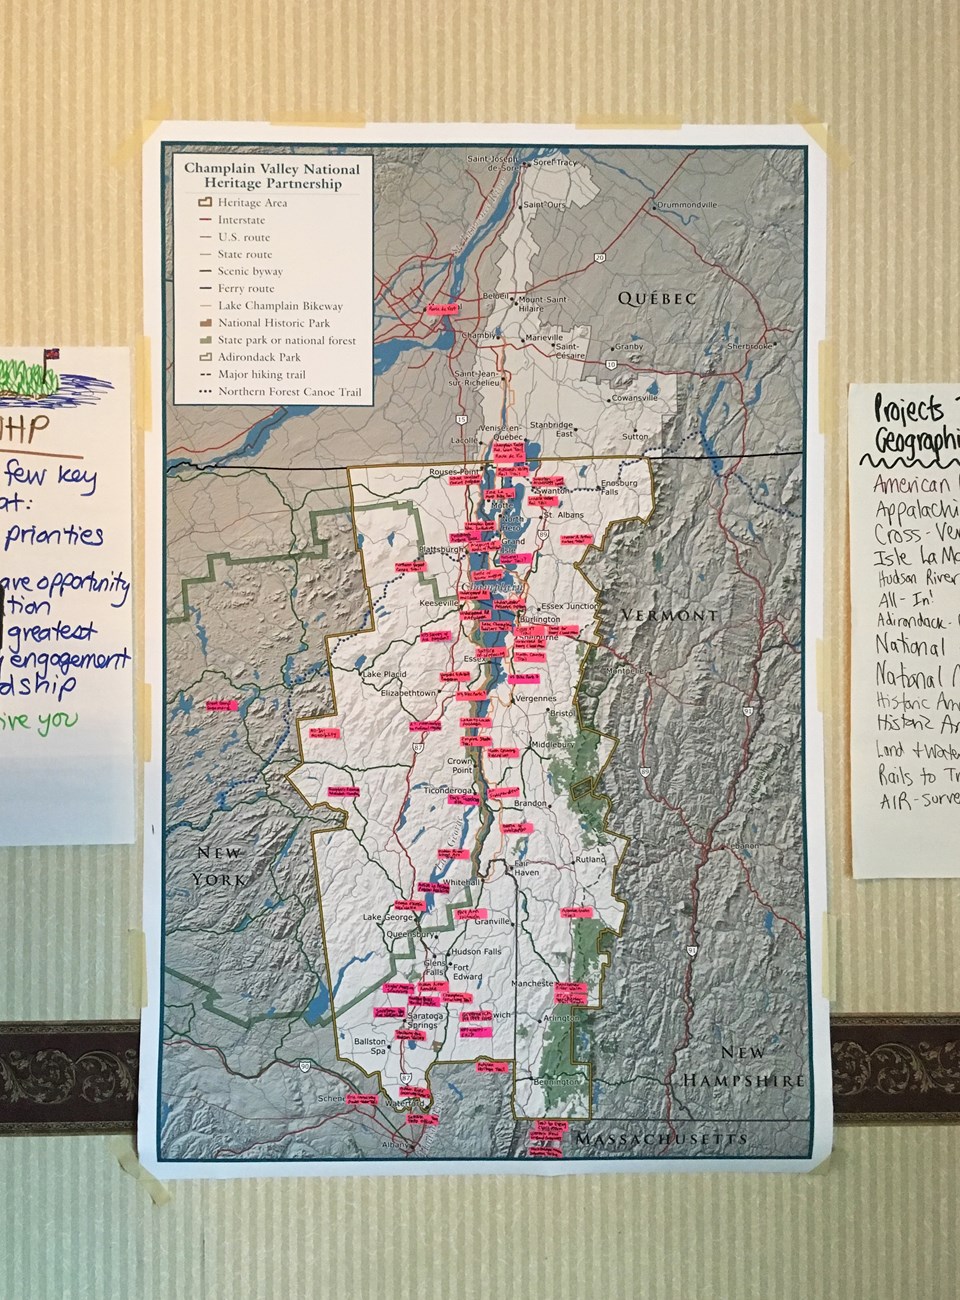 Workshop participants completed a map of projects in the Champlain NHP to visualize potential areas of collaboration